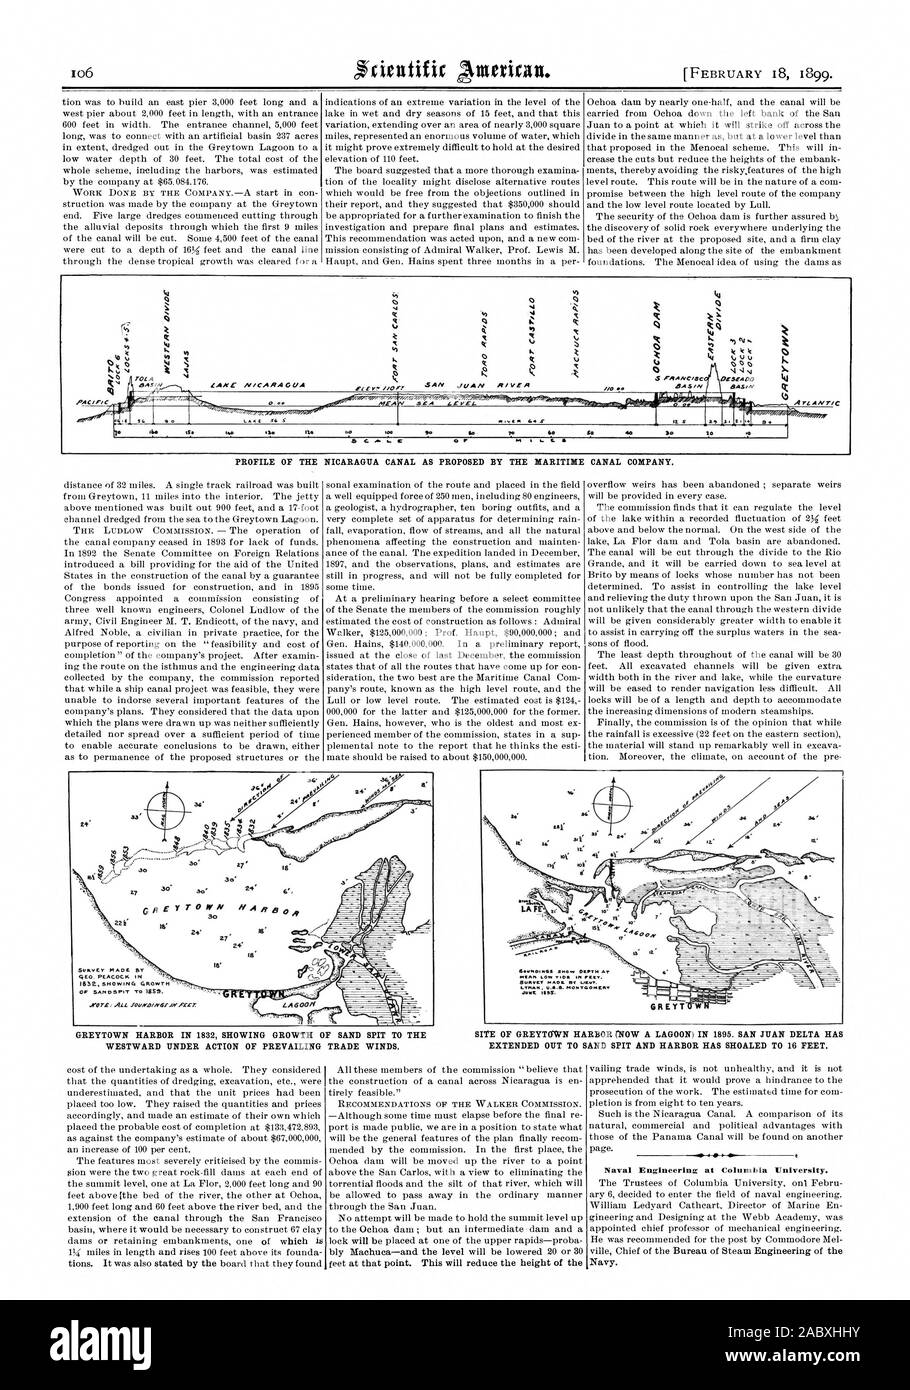 PROFILE OF THE NICARAGUA CANAL AS PROPOSED BY THE MARITIME CANAL COMPANY. 0 40 IG IS. .40 C a- c 2 JAN ZANE ICARA GA PAC 0.os II 0 Migrol'Tfr TIF  ArzAlic AYEA GREYTOWN HARBOR IN 1832 SHOWING GROWTH OF SAND SPIT TO THE WESTWARD UNDER ACTION OF PREVAILING TRADE WINDS. SITE OF GREYTOWN HARBOR (NOW A LAGOON) IN 1895. SAN JUAN DELTA HAS EXTENDED OUT TO SAND SPIT AND HARBOR HAS SHOALED TO 16 FEET. .:di  Al Z. --)-'- oo .N. .   30 Z7. .30 (.' 30. W N 30 2.7 24: u ADE 13Y q CO. PEACOCK IN ' 1652 smOwiNG GRowrri OF AAAAAA IT To ISSO. aef 14' el REAR LOW V.& IN VEIT PPPPPP MANS OT LIEU?. LTRAN Stock Photo